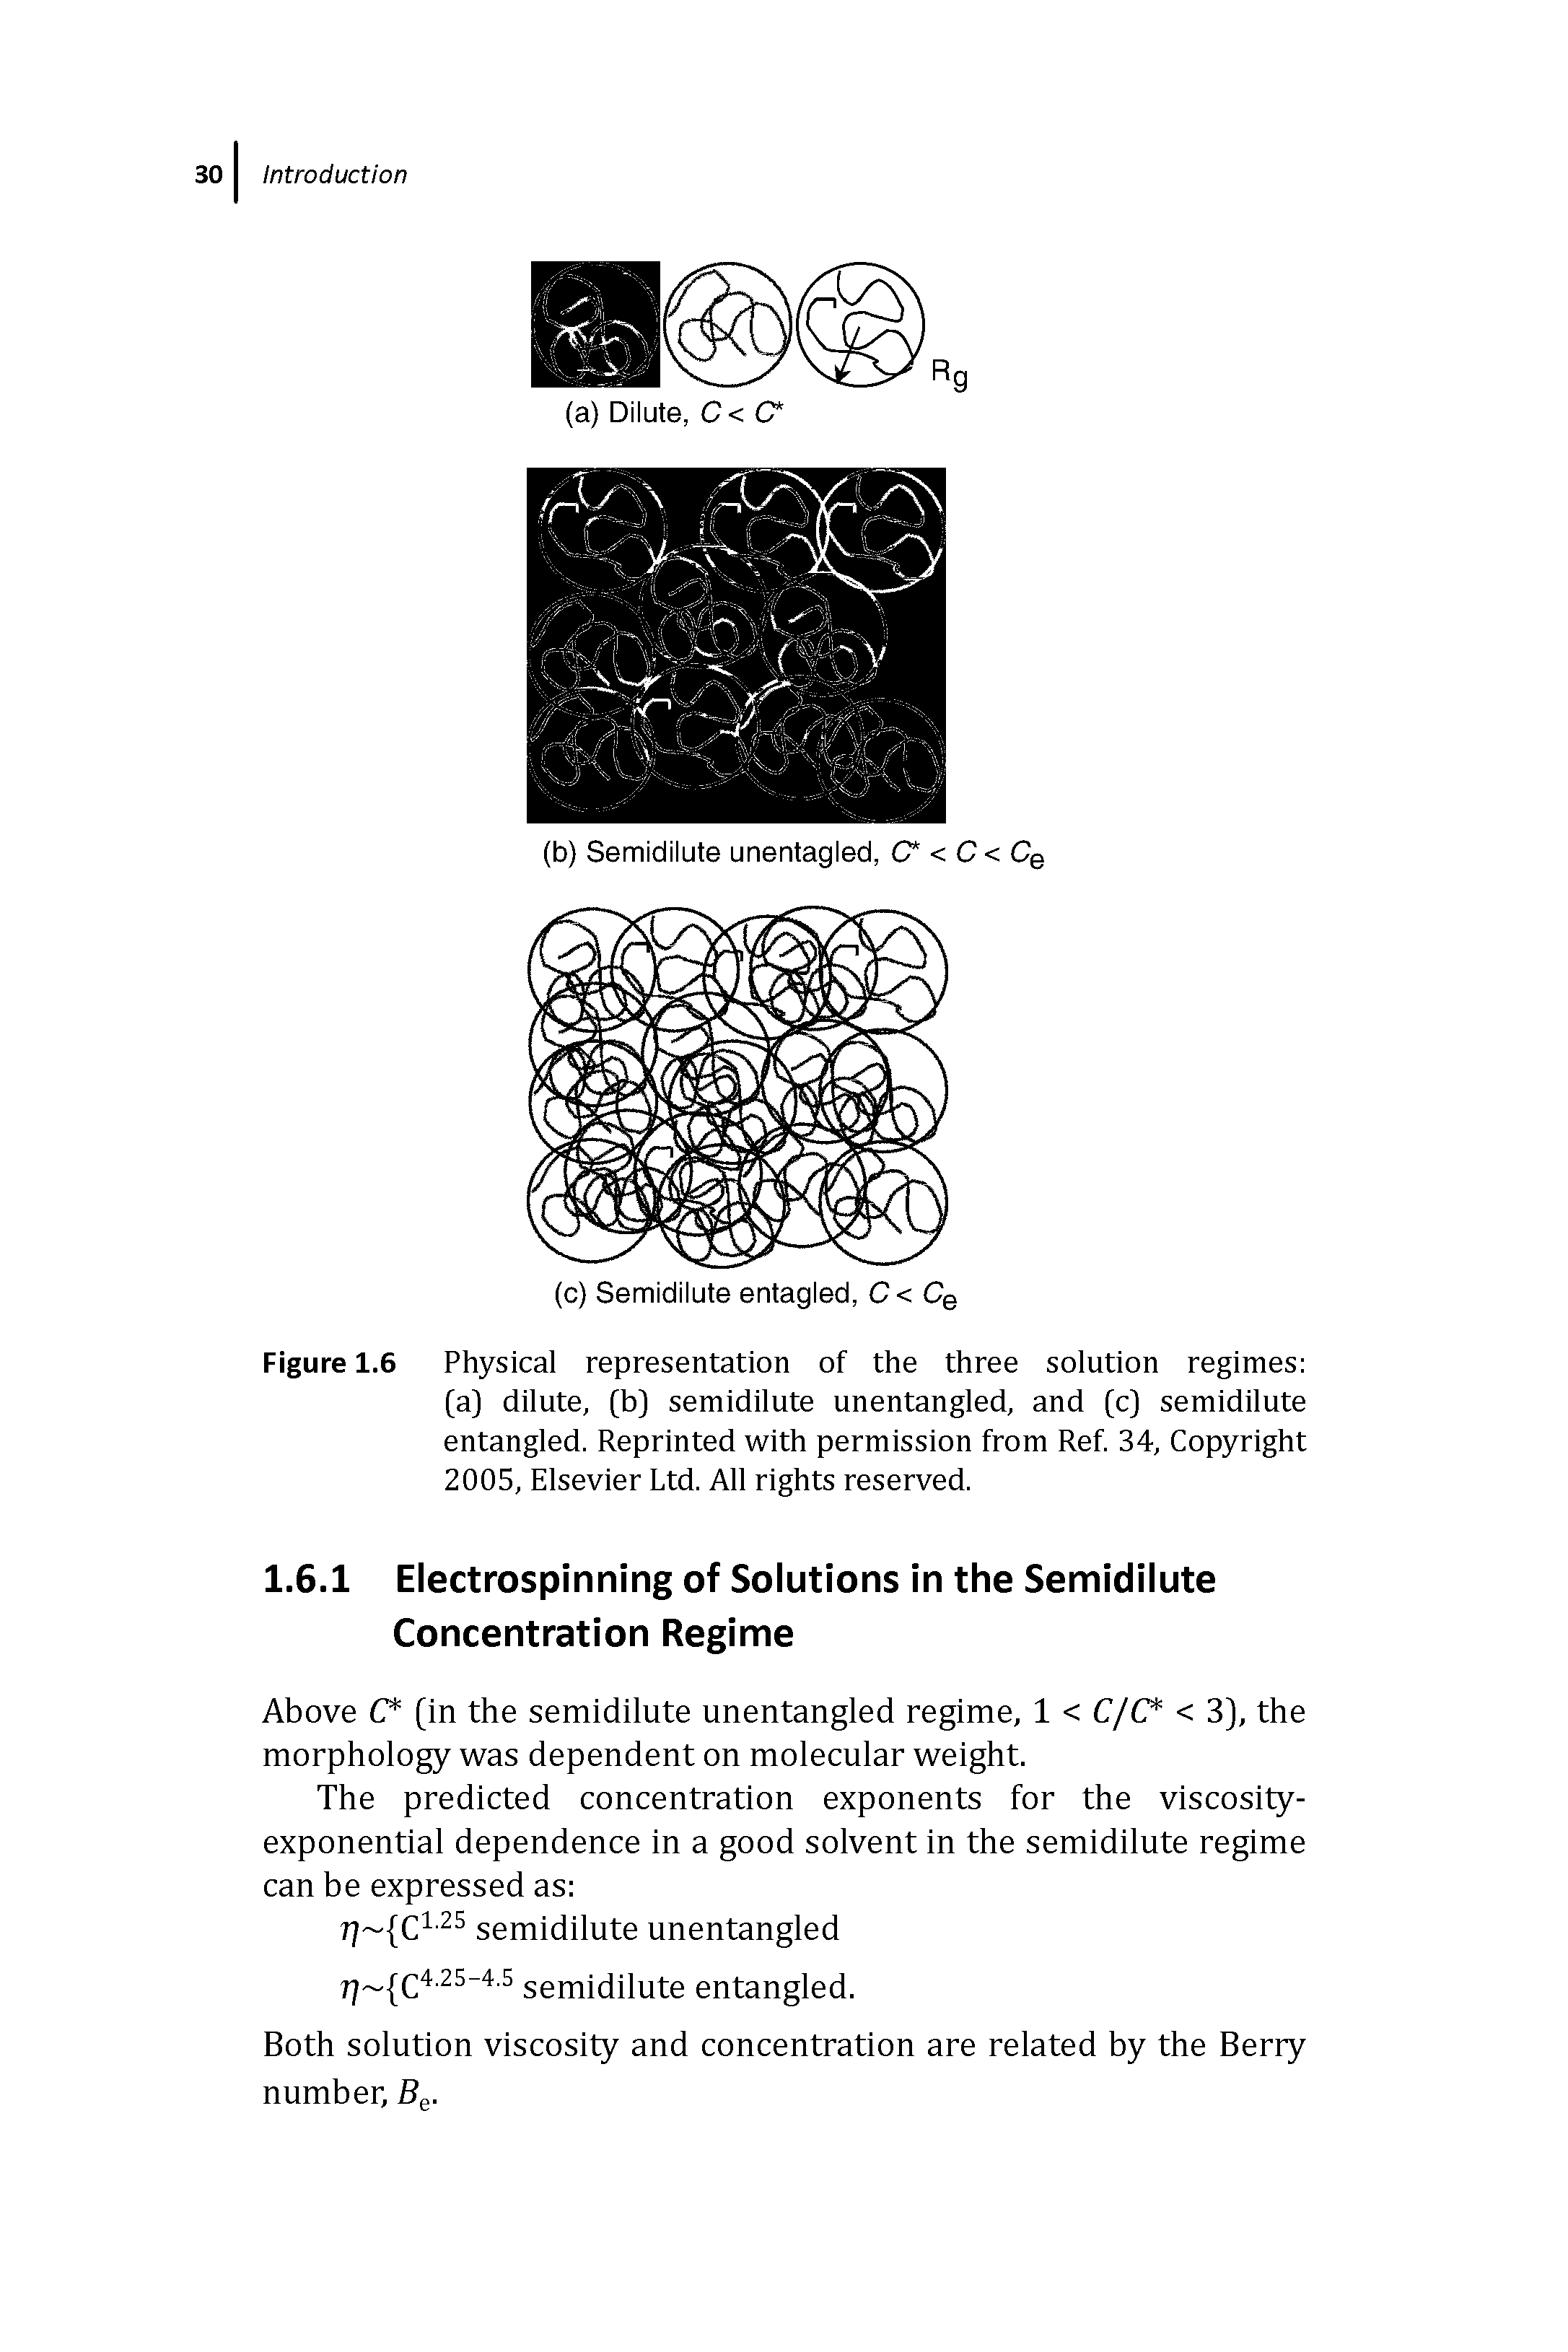 Figure 1.6 Physical representation of the three solution regimes [a] dilute, [b] semidilute unentangled, and [c] semidilute entangled. Reprinted with permission from Ref 34, Copyright 2005, Elsevier Ltd. All rights reserved.